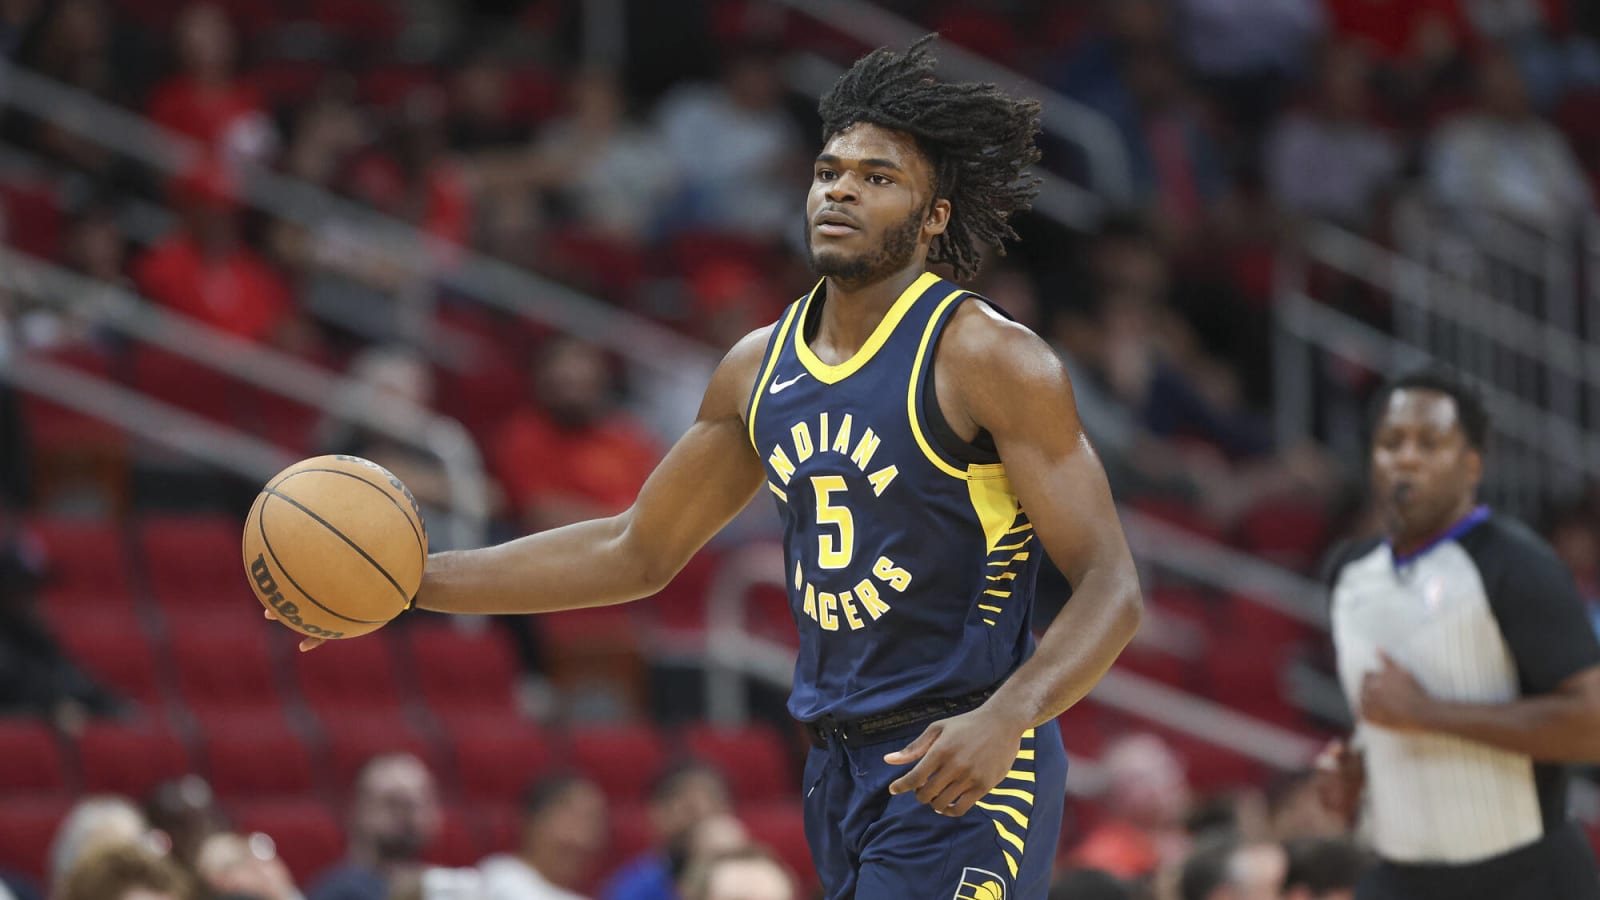 Indiana Pacers first-round picks Jarace Walker and Ben Sheppard assigned to G League for playing time